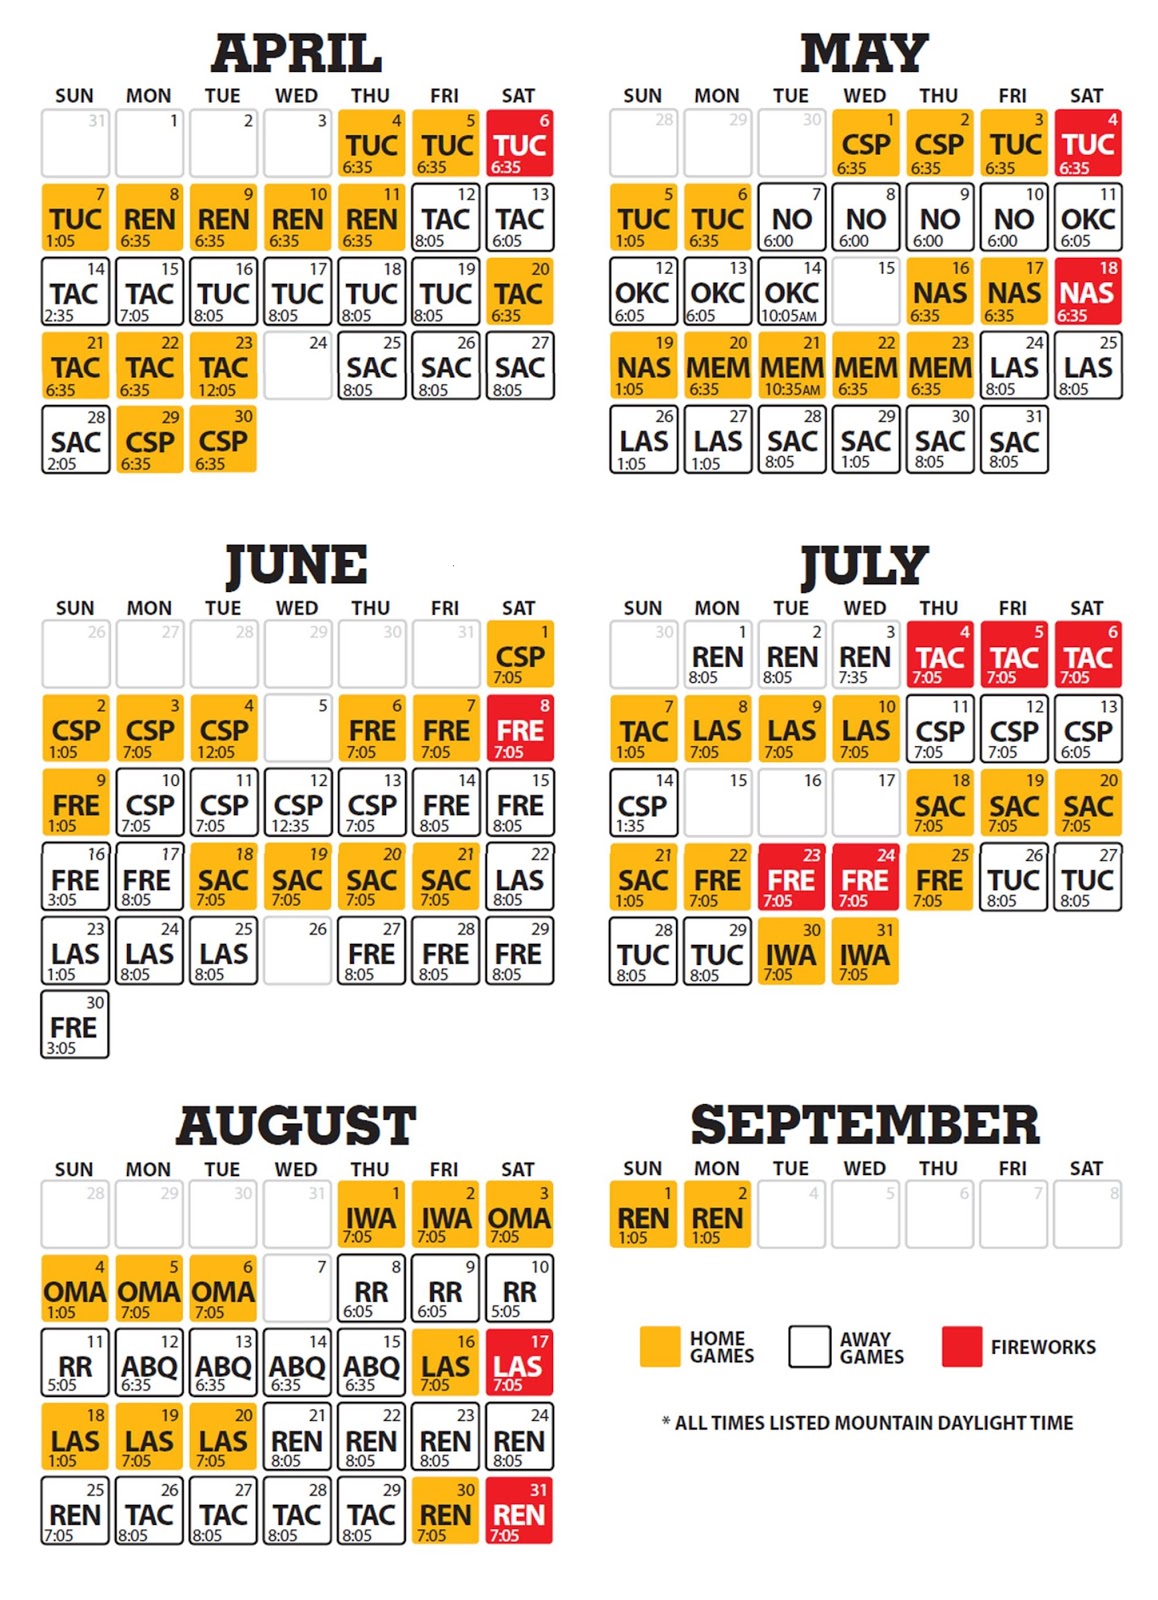 Salt Lake Bees Discount Tickets, Info, and more! 2013 Salt Lake Bees